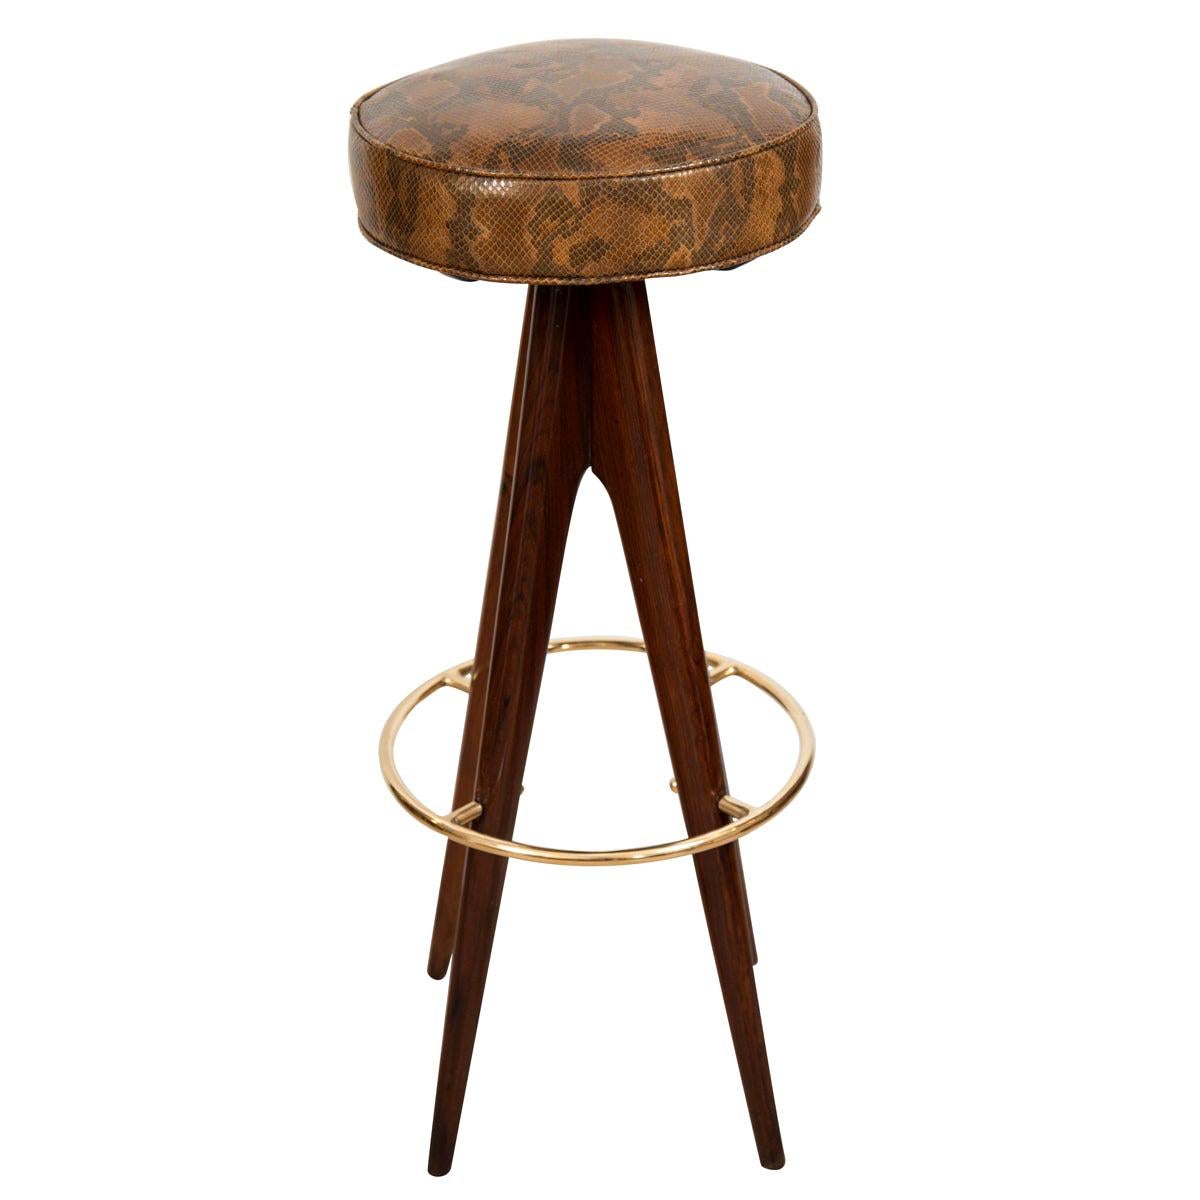 Pair of Four-Leg Wood Stools with Snake Skin Upholstered Seats and Brass Details